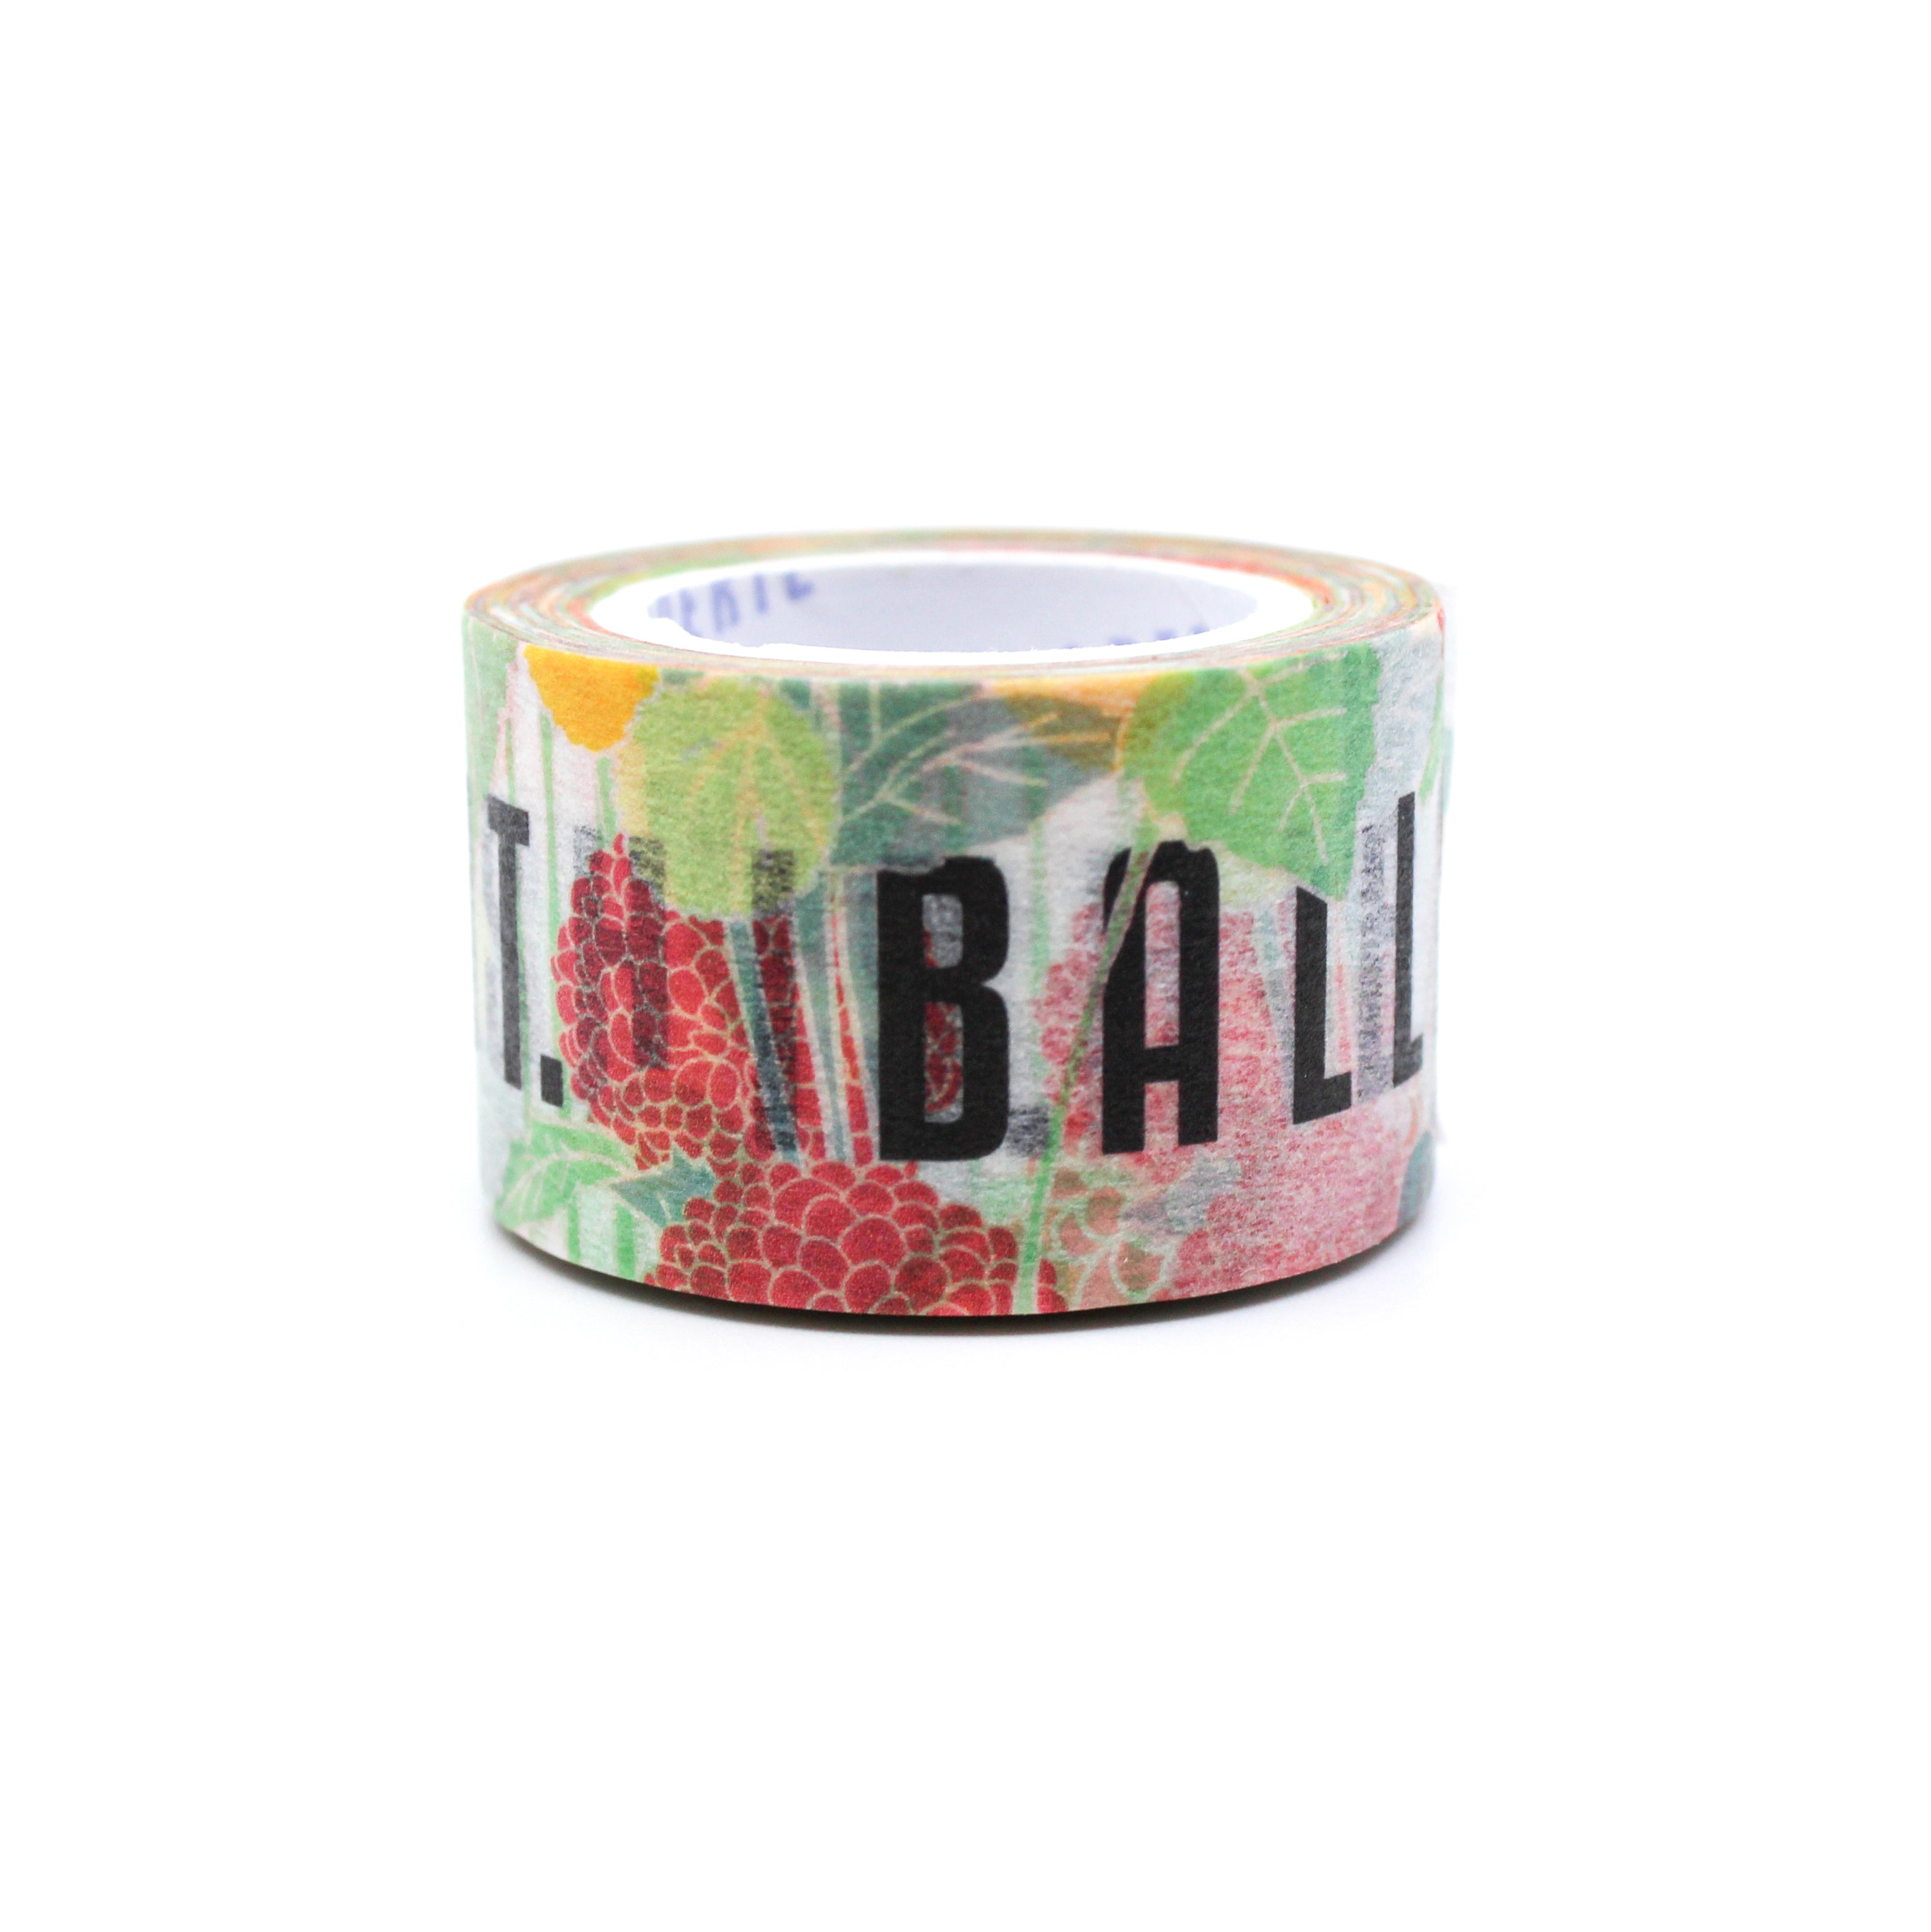 This is a photo of the wide cuss words washi tape for journaling people who are proud of their foul mouth take on the world by BBB Supplies.